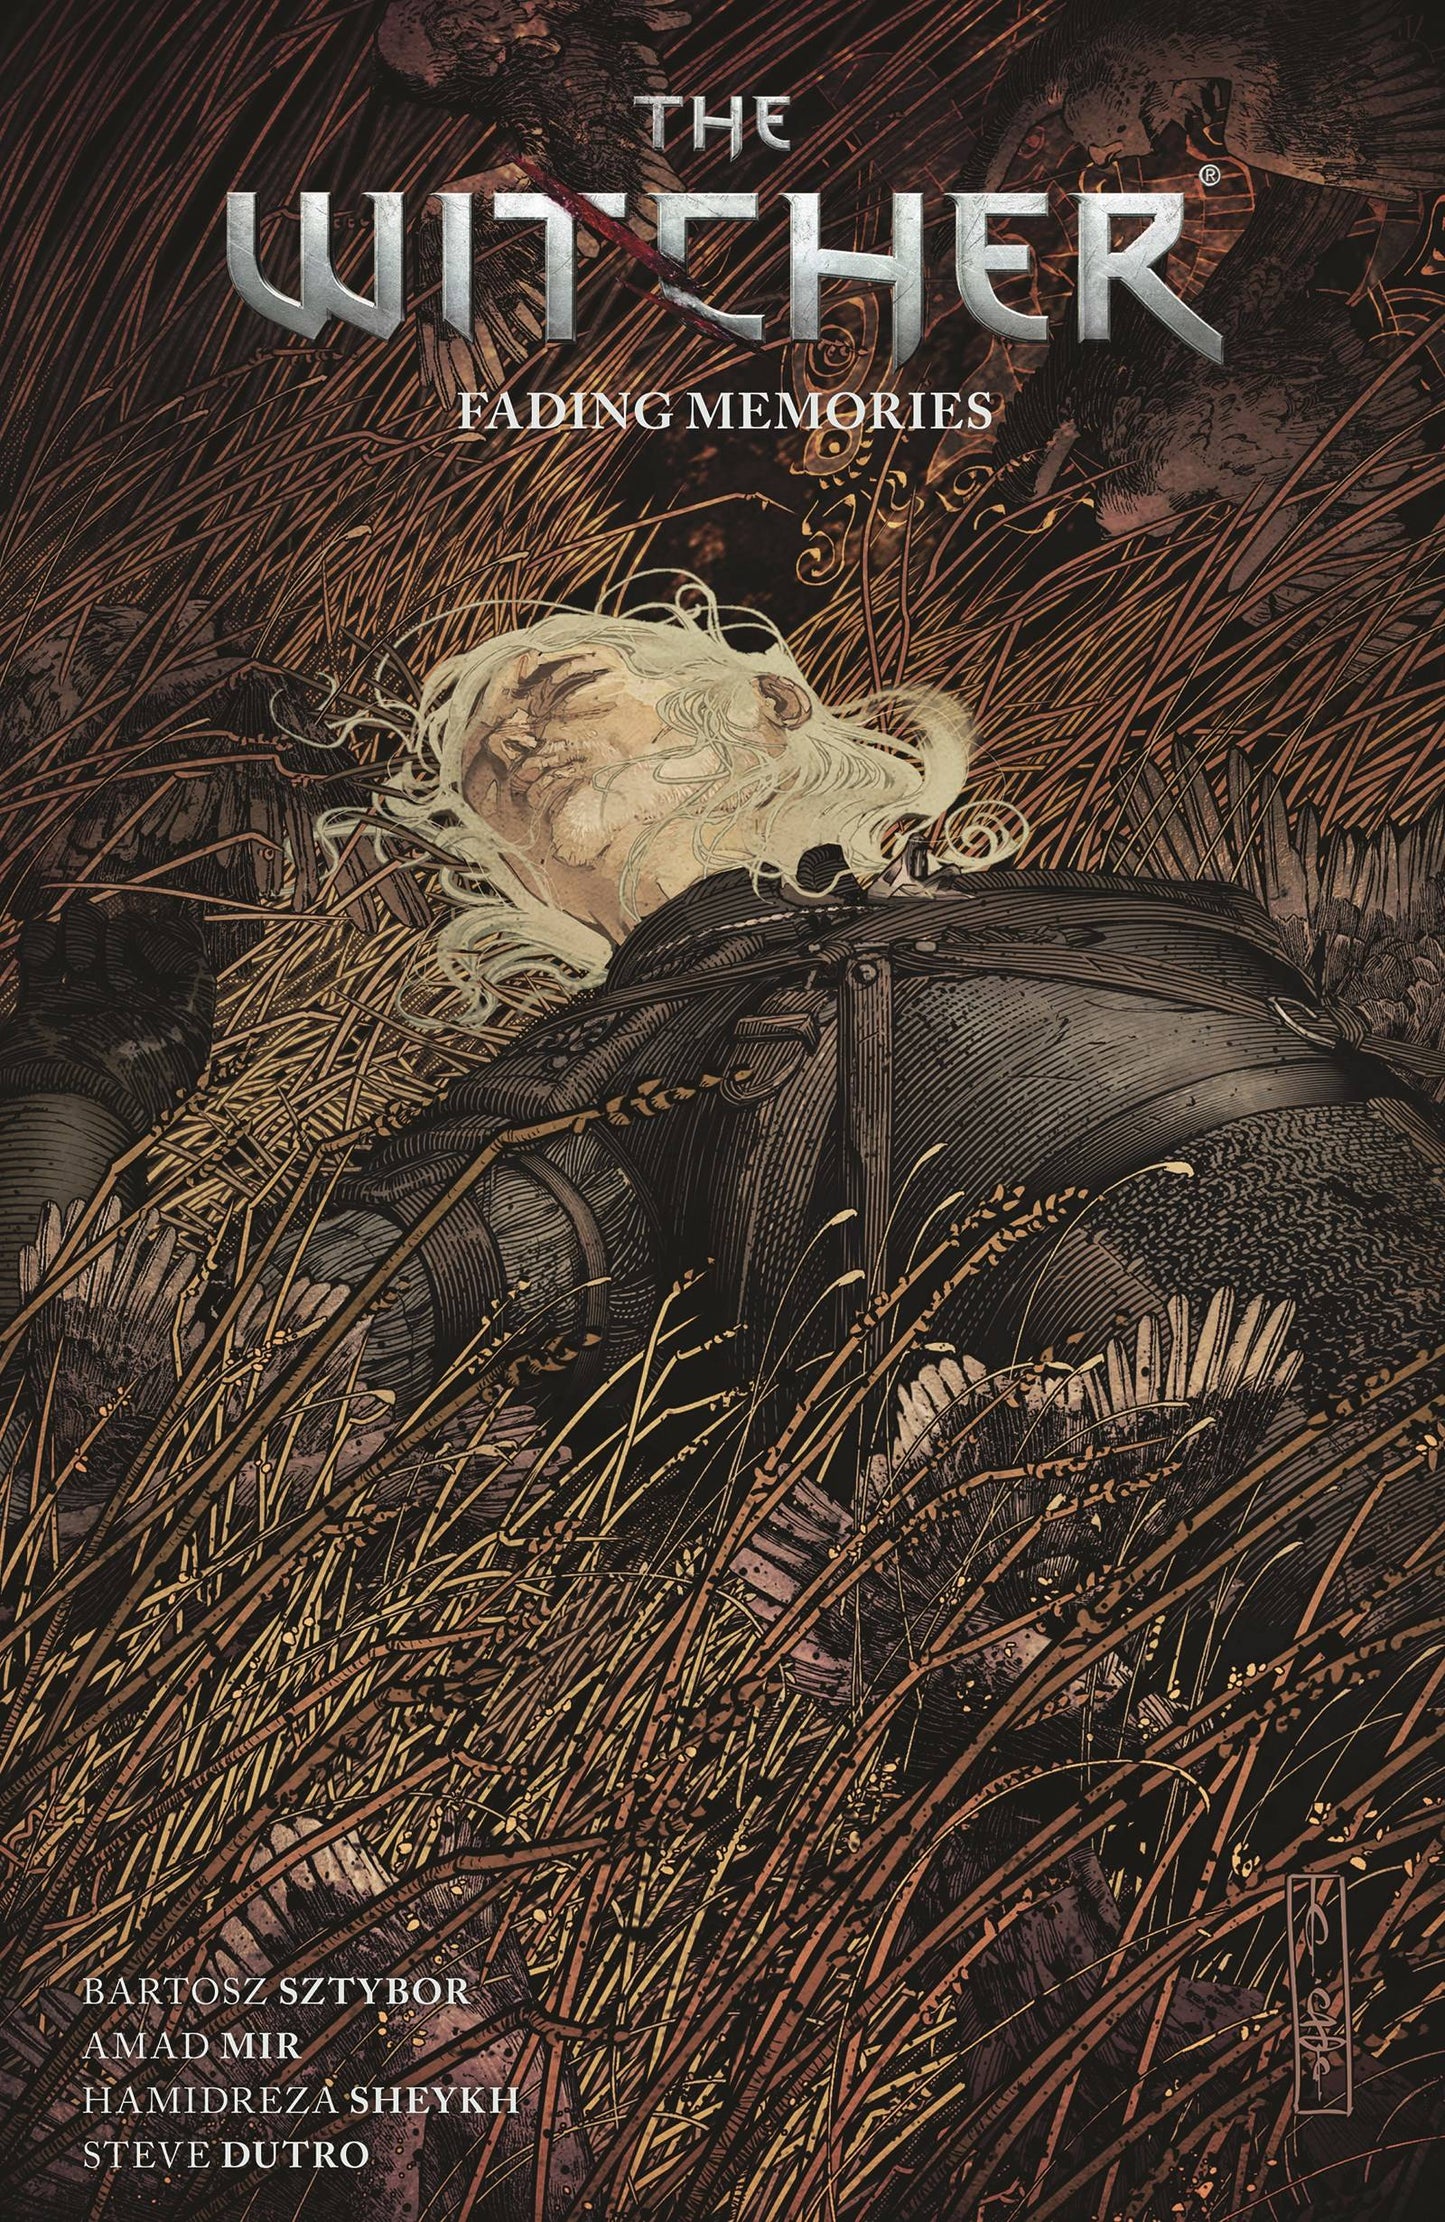 The Witcher Volume 5: Fading Memories Paperback